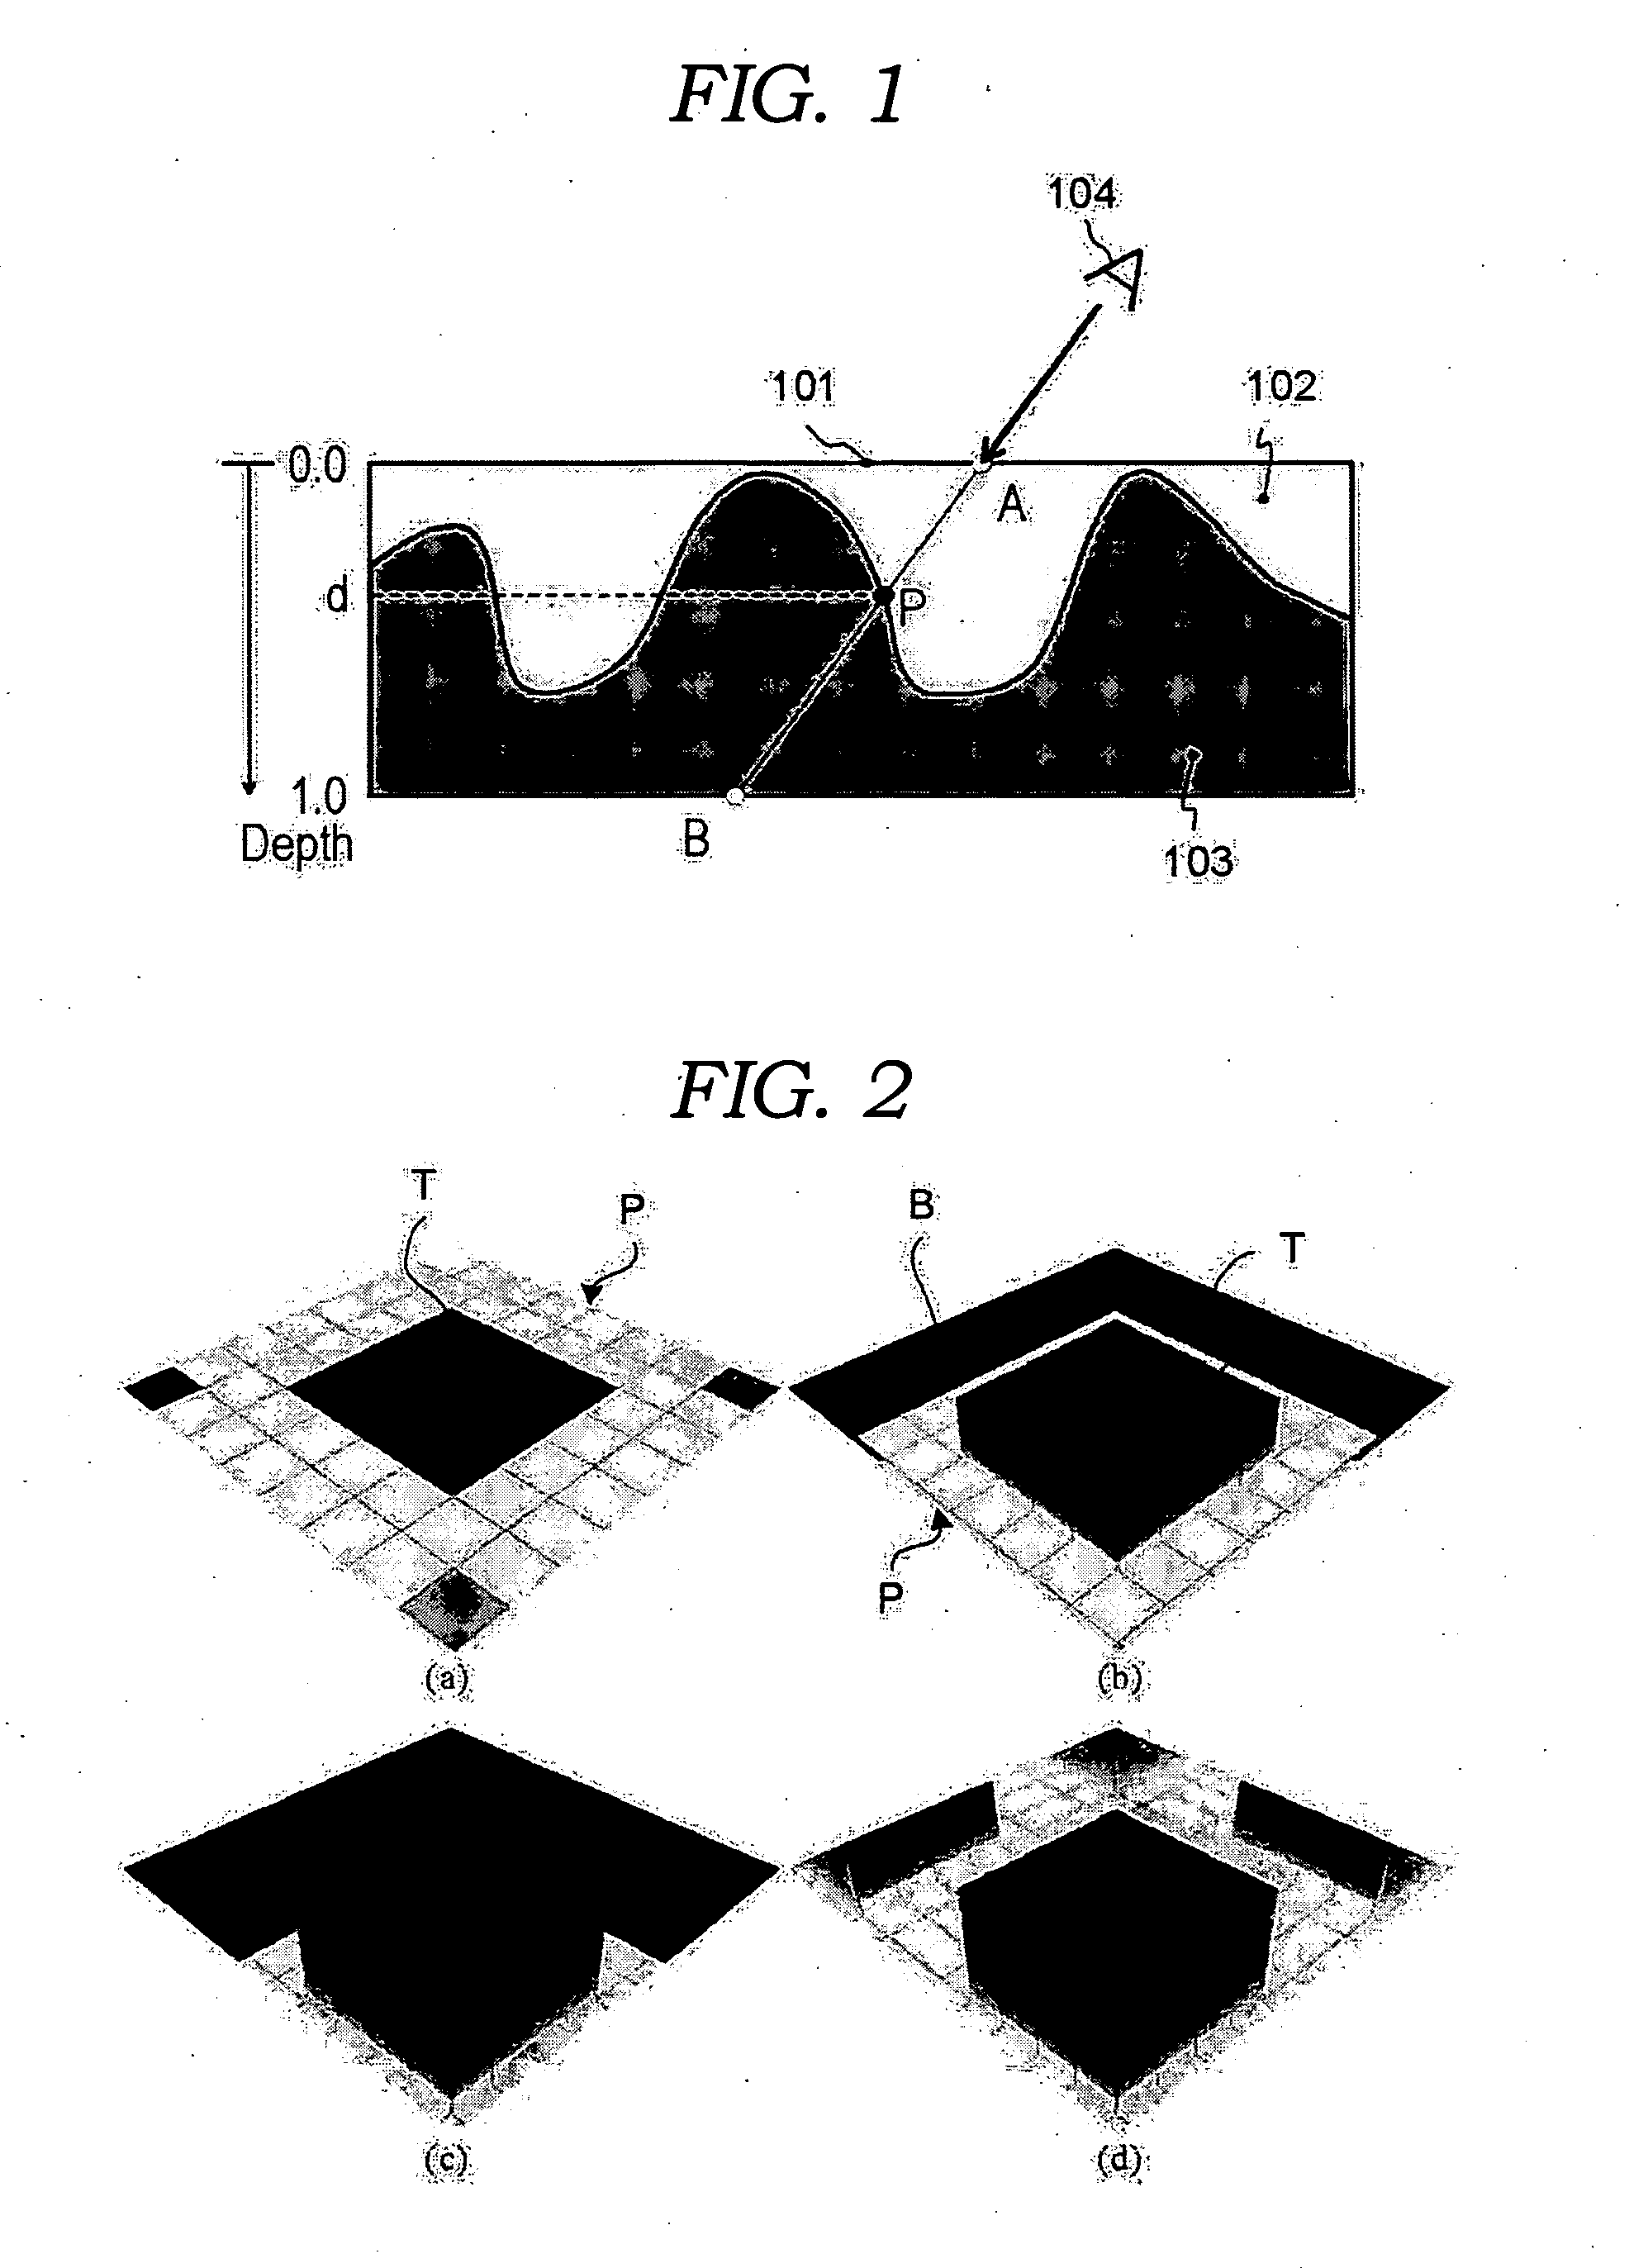 Image-based protruded displacement mapping method and bi-layered displacement mapping method using the same